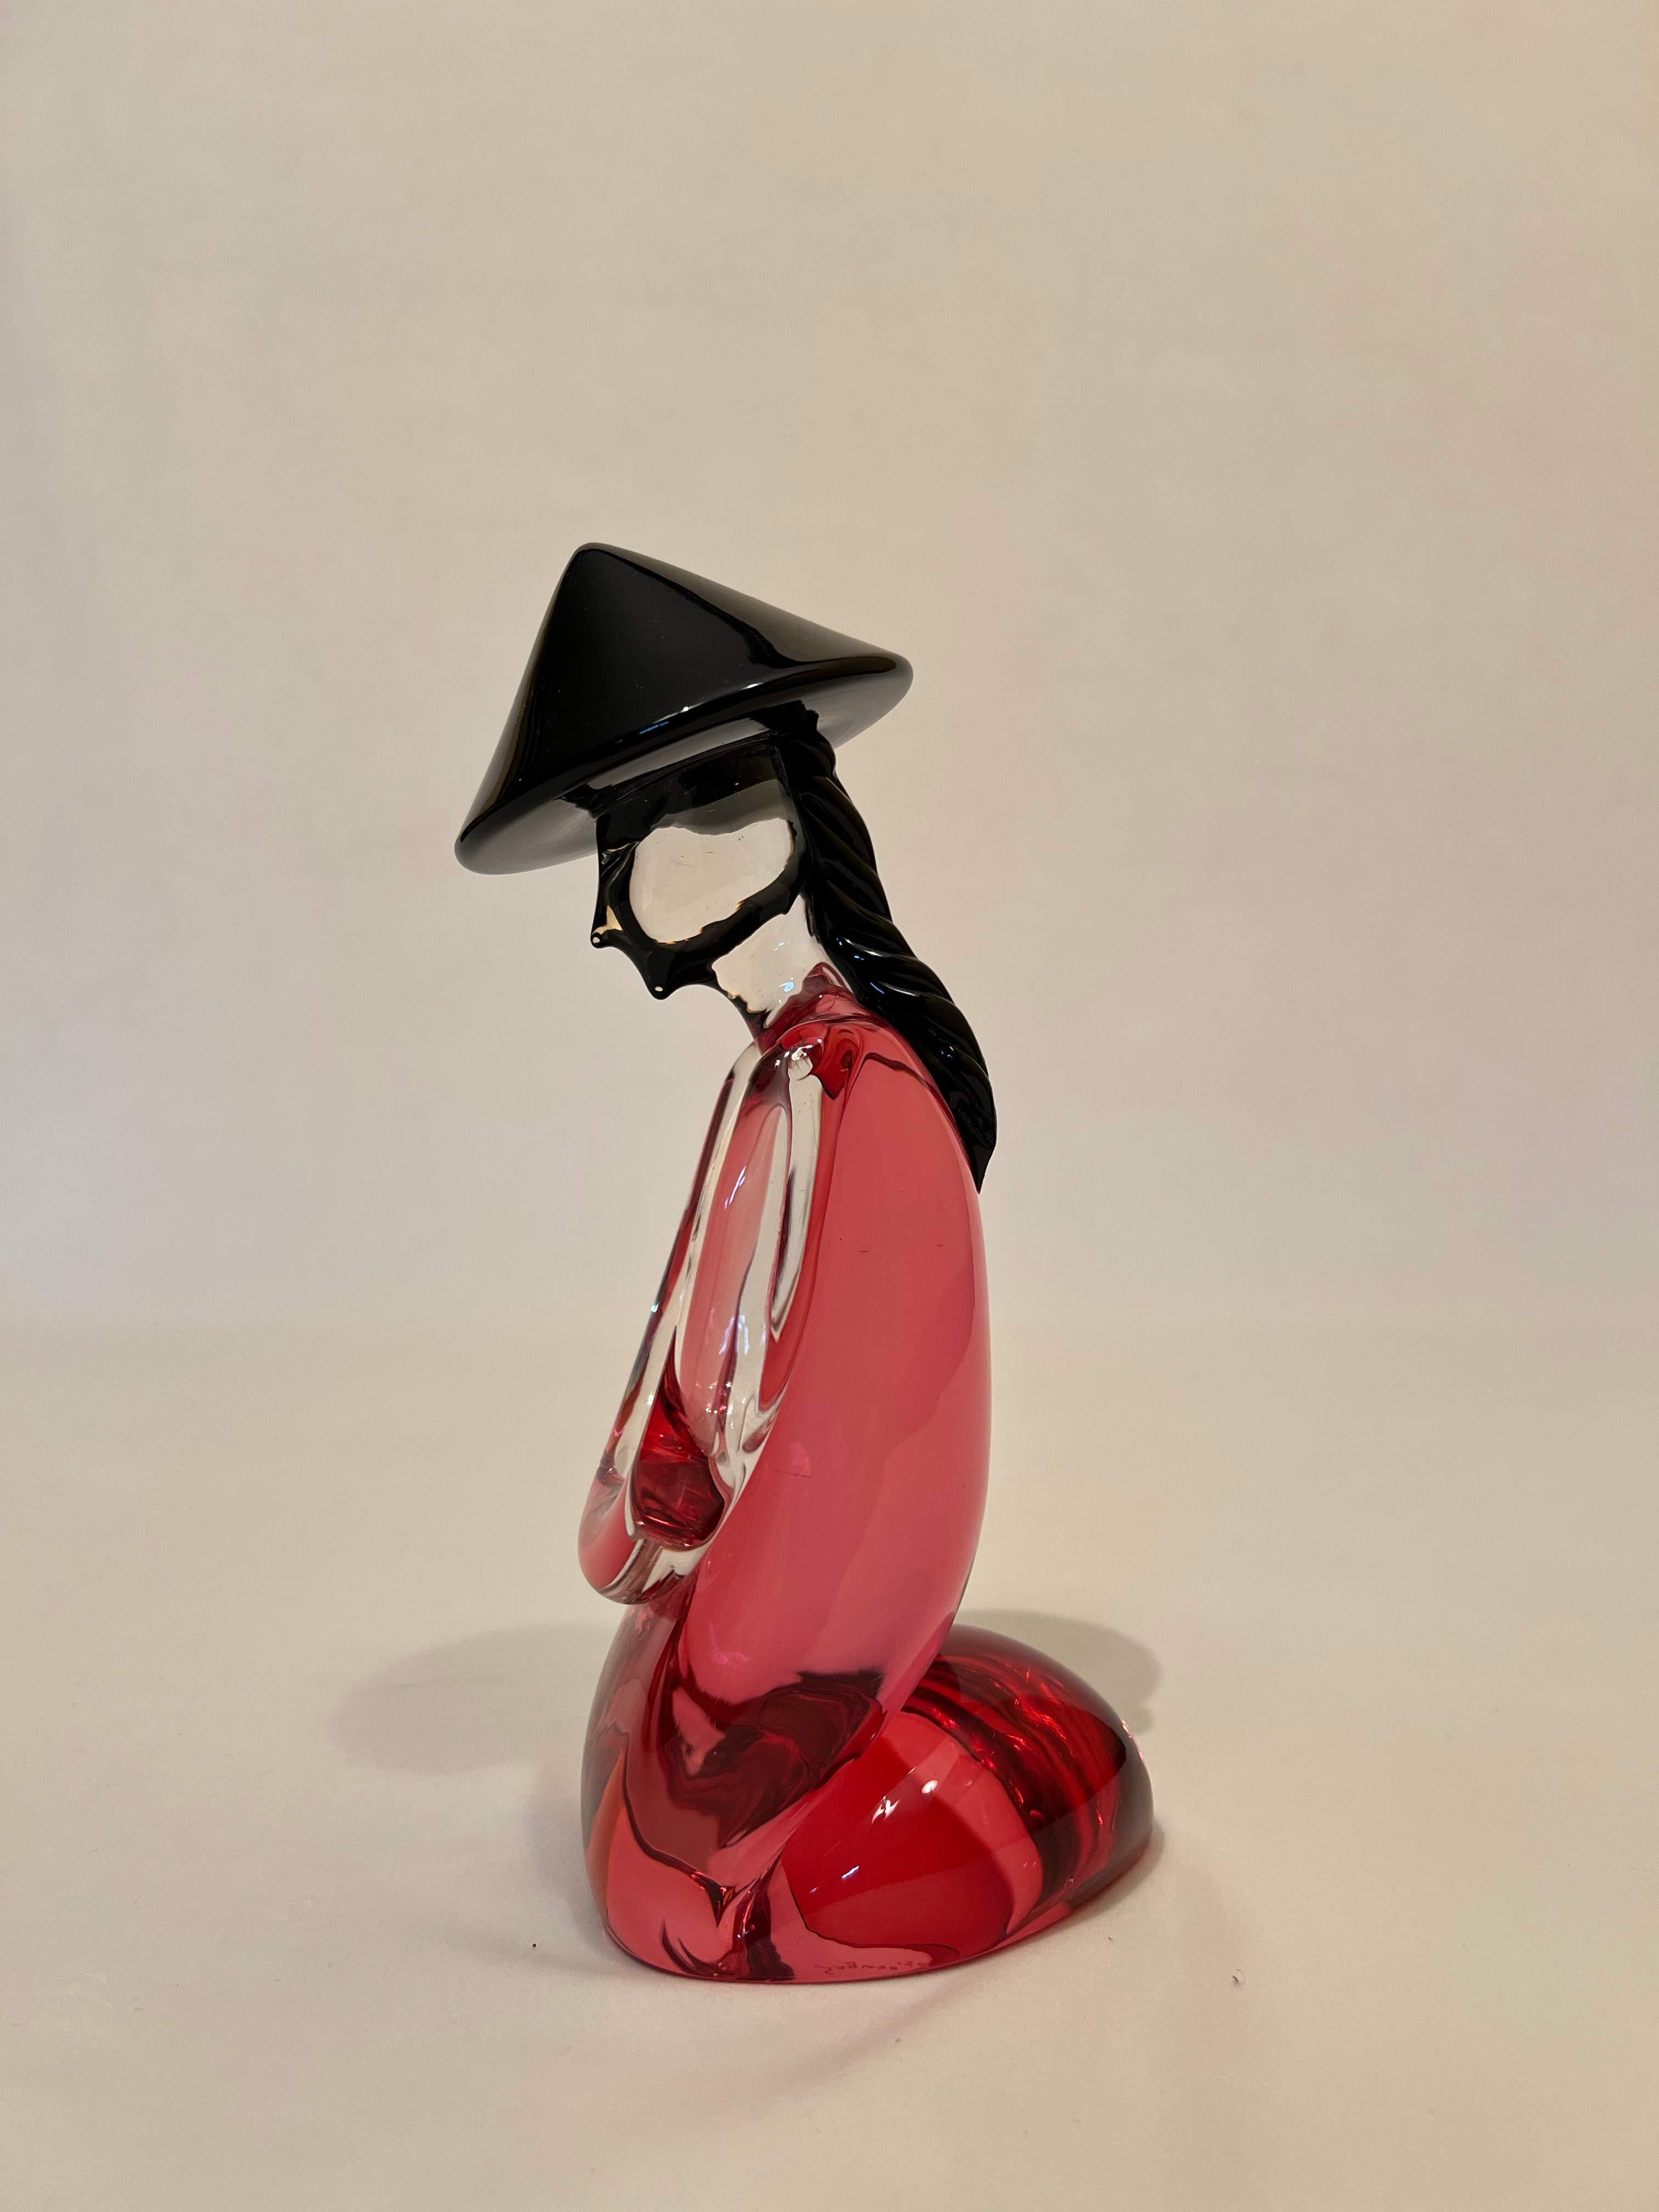 Polychrome statue depicting a kneeling Japanese woman. The statue is in two colours, carmine red and black. The body is red and the typical Japanese hat, and braid, black. The braid has been finely crafted by weaving Murano glass, using ancient